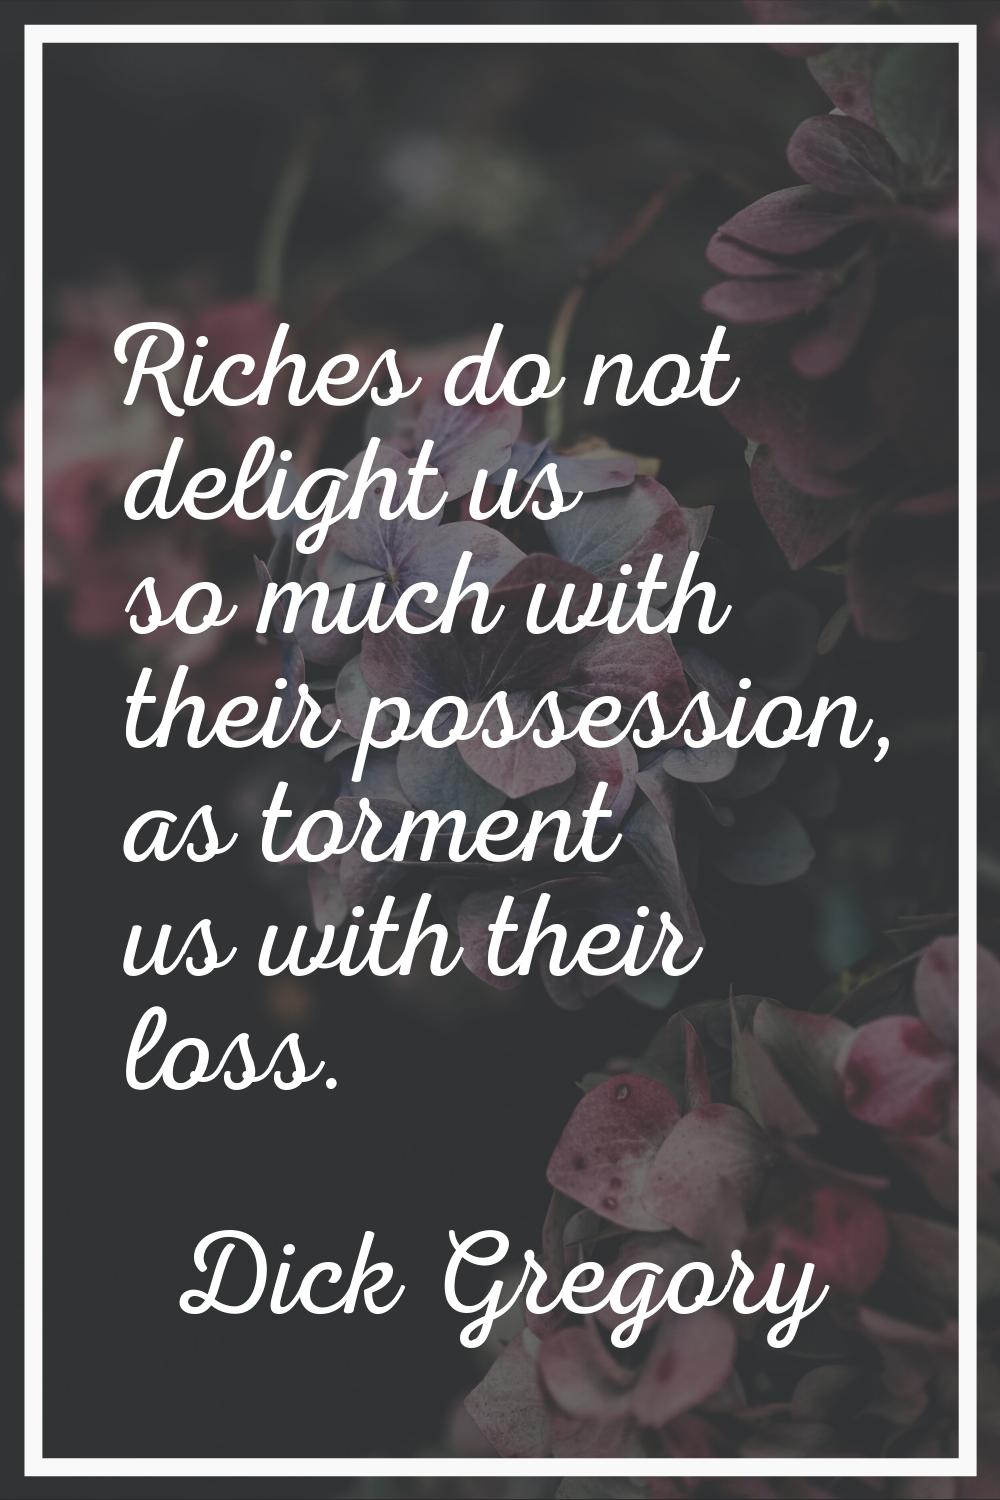 Riches do not delight us so much with their possession, as torment us with their loss.